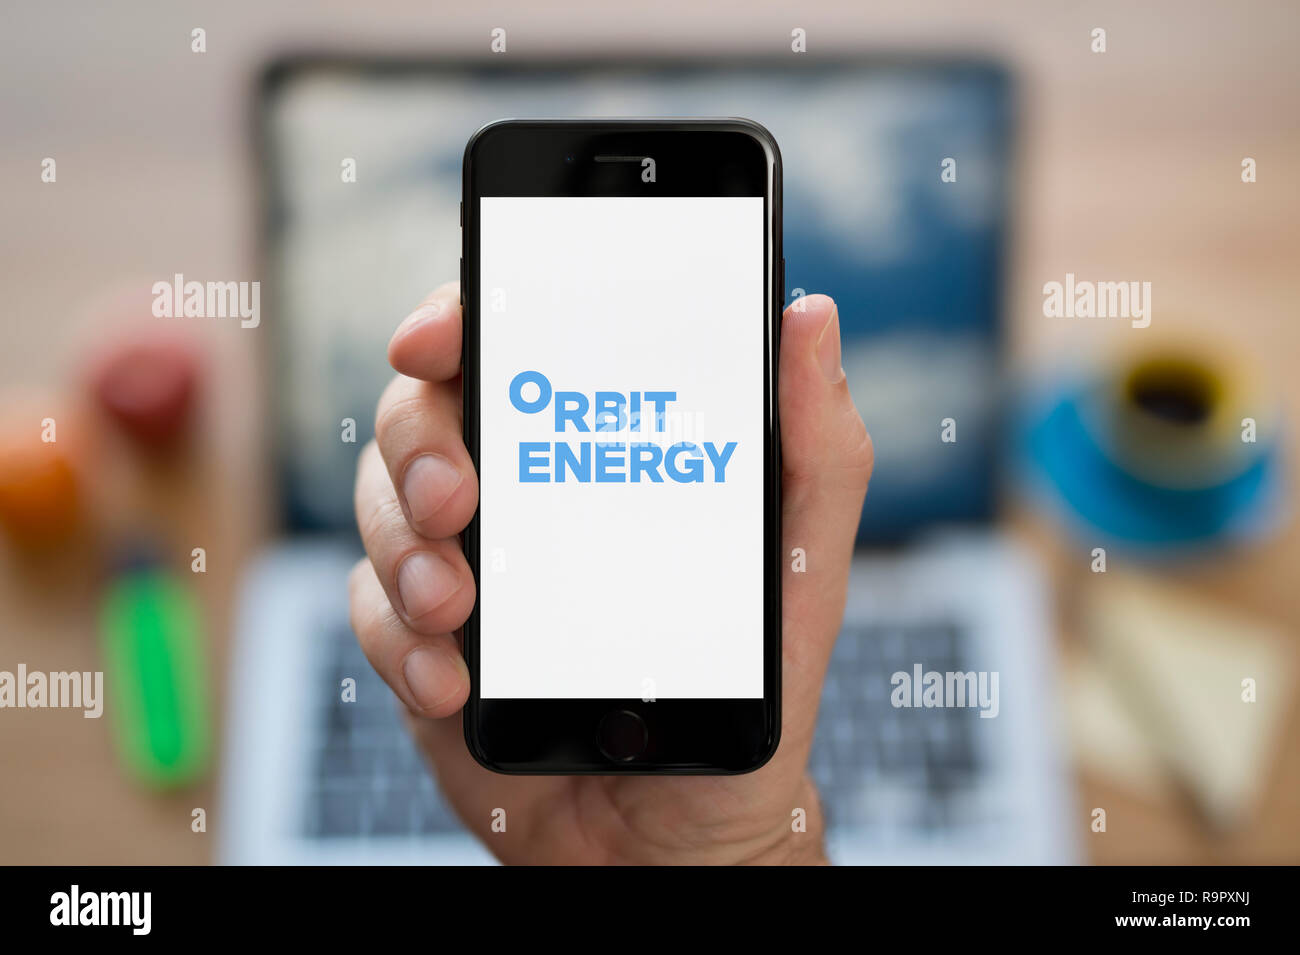 A man looks at his iPhone which displays the Orbit Energy logo (Editorial use only). Stock Photo